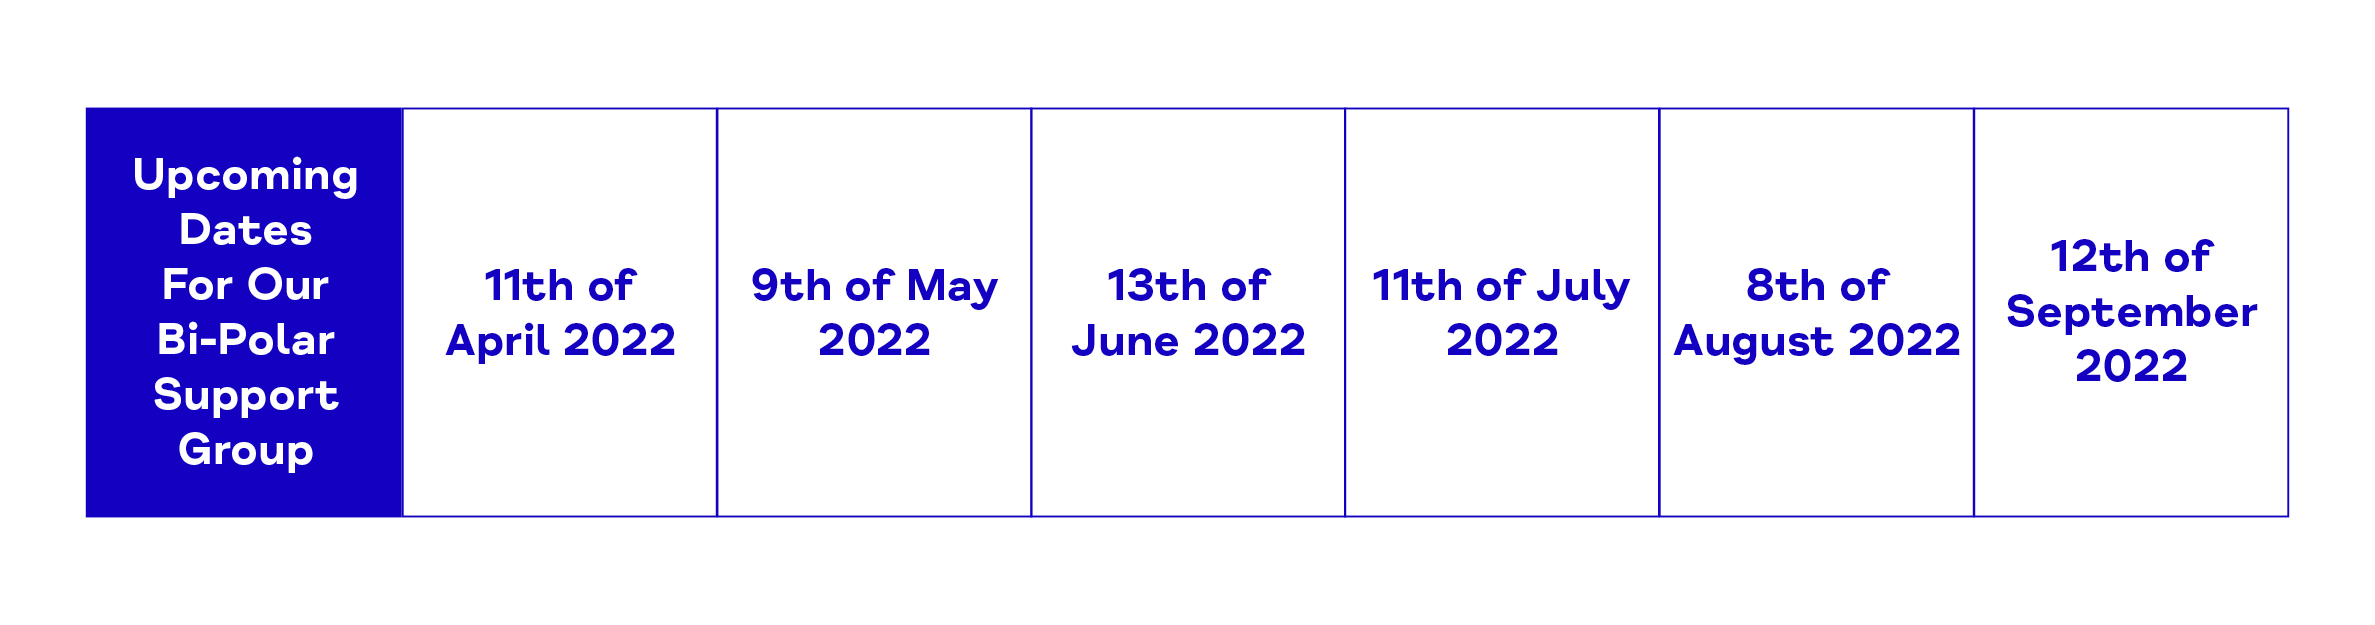 Upcoming Dates For Our Bi-Polar Support Group. 11th of April 2022. 9th of May 2022. 13th of June 2022. 11th of July 2022. 8th of August 2022. 12th of September 2022.